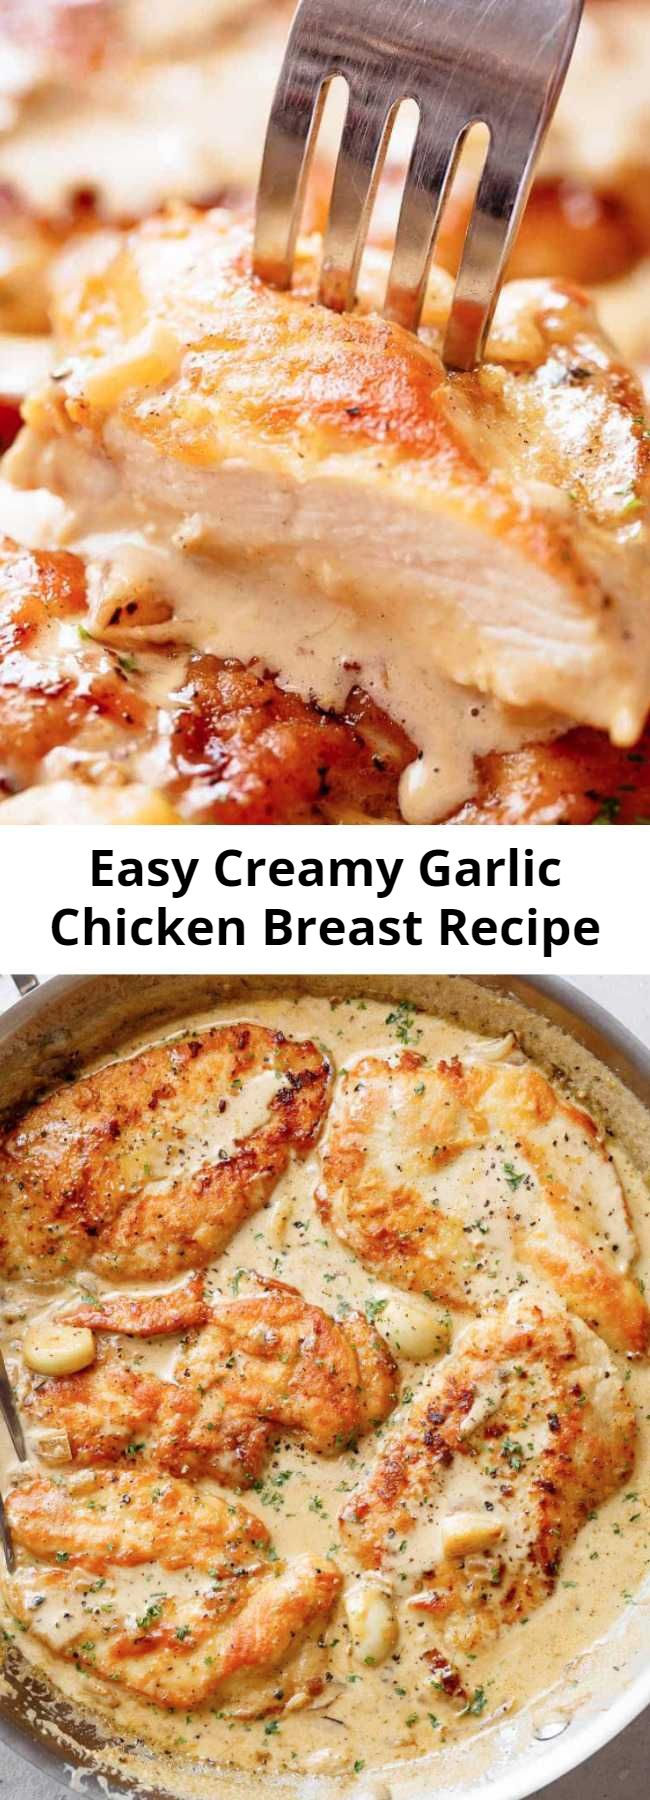 Easy Creamy Garlic Chicken Breast Recipe - Lightly floured boneless chicken breasts are pan fried in until golden and crispy before being added to a mouth-watering garlic cream sauce! Filled with caramelized flavour, you will LOVE how easy this is!